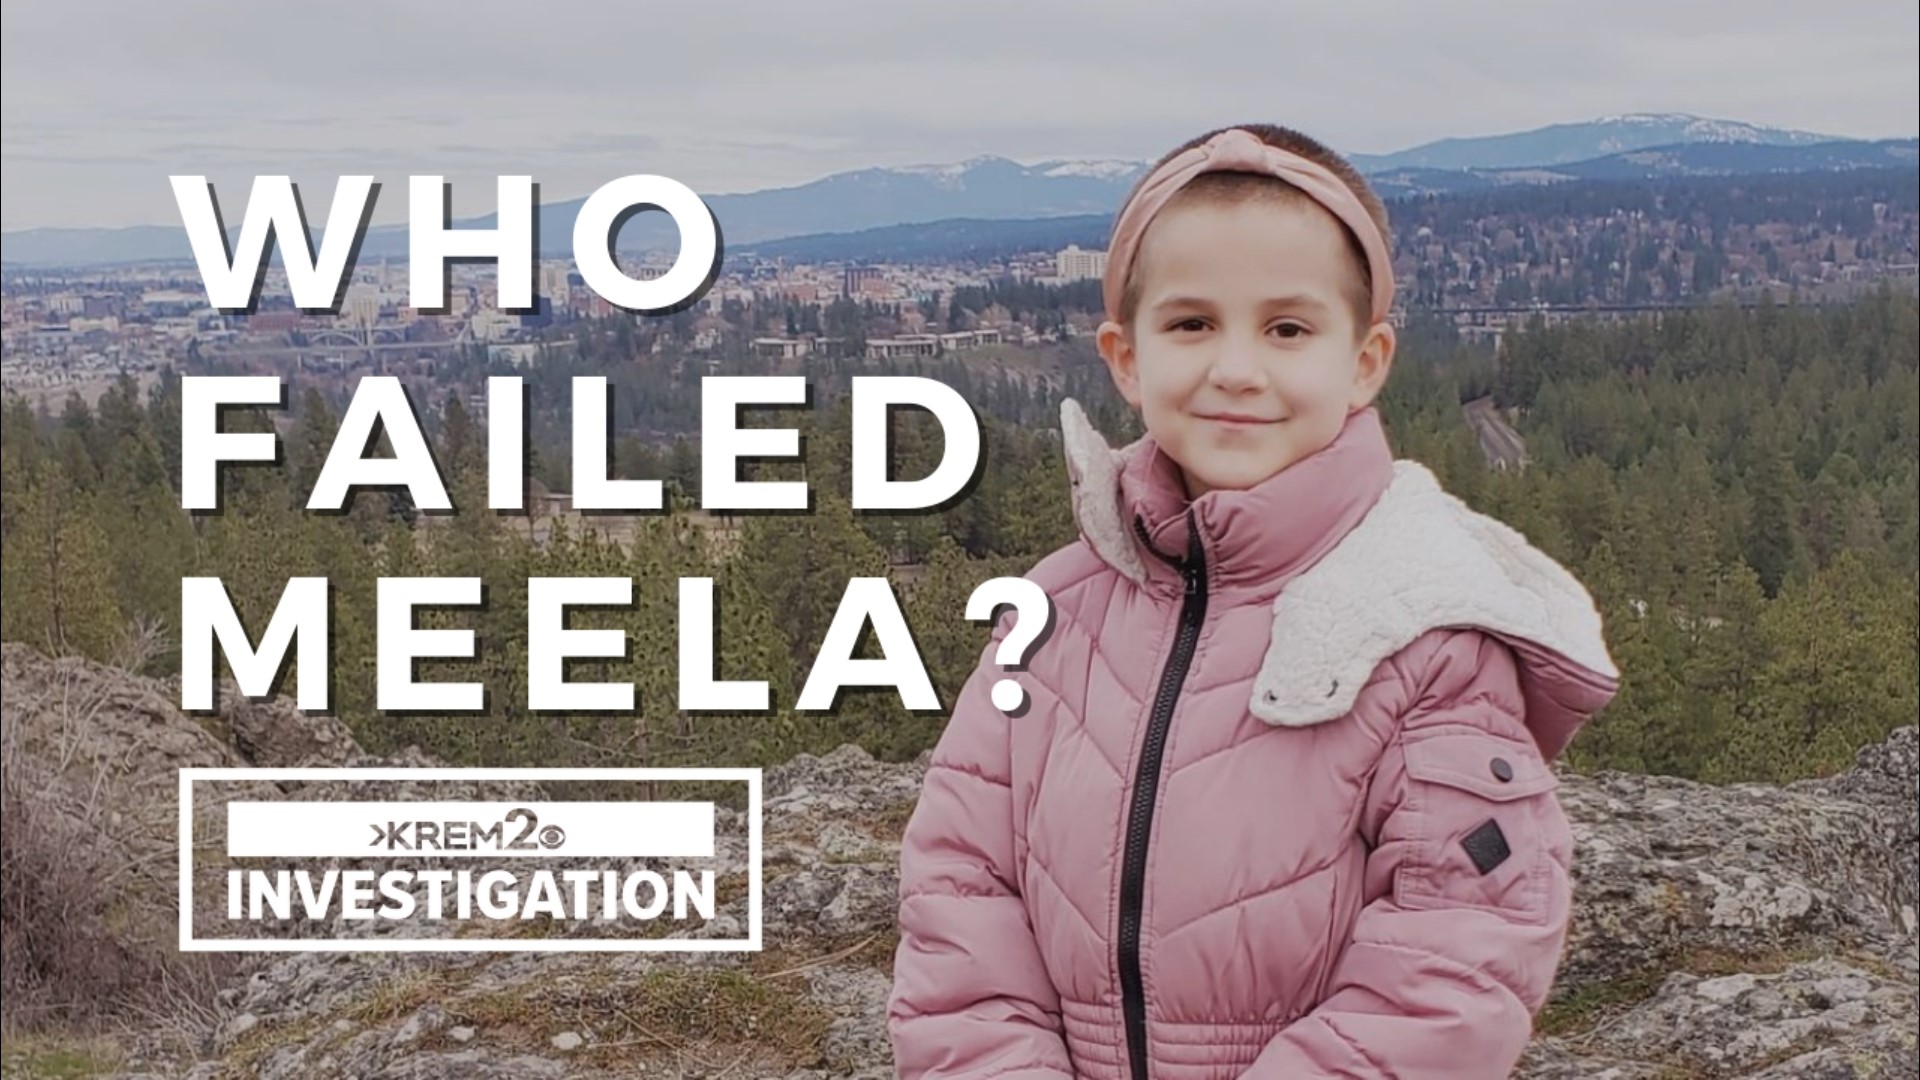 Police say 8-year-old Meela Miller endured horrific abuse by her legal guardian, leading many to wonder why she never got the help she needed.